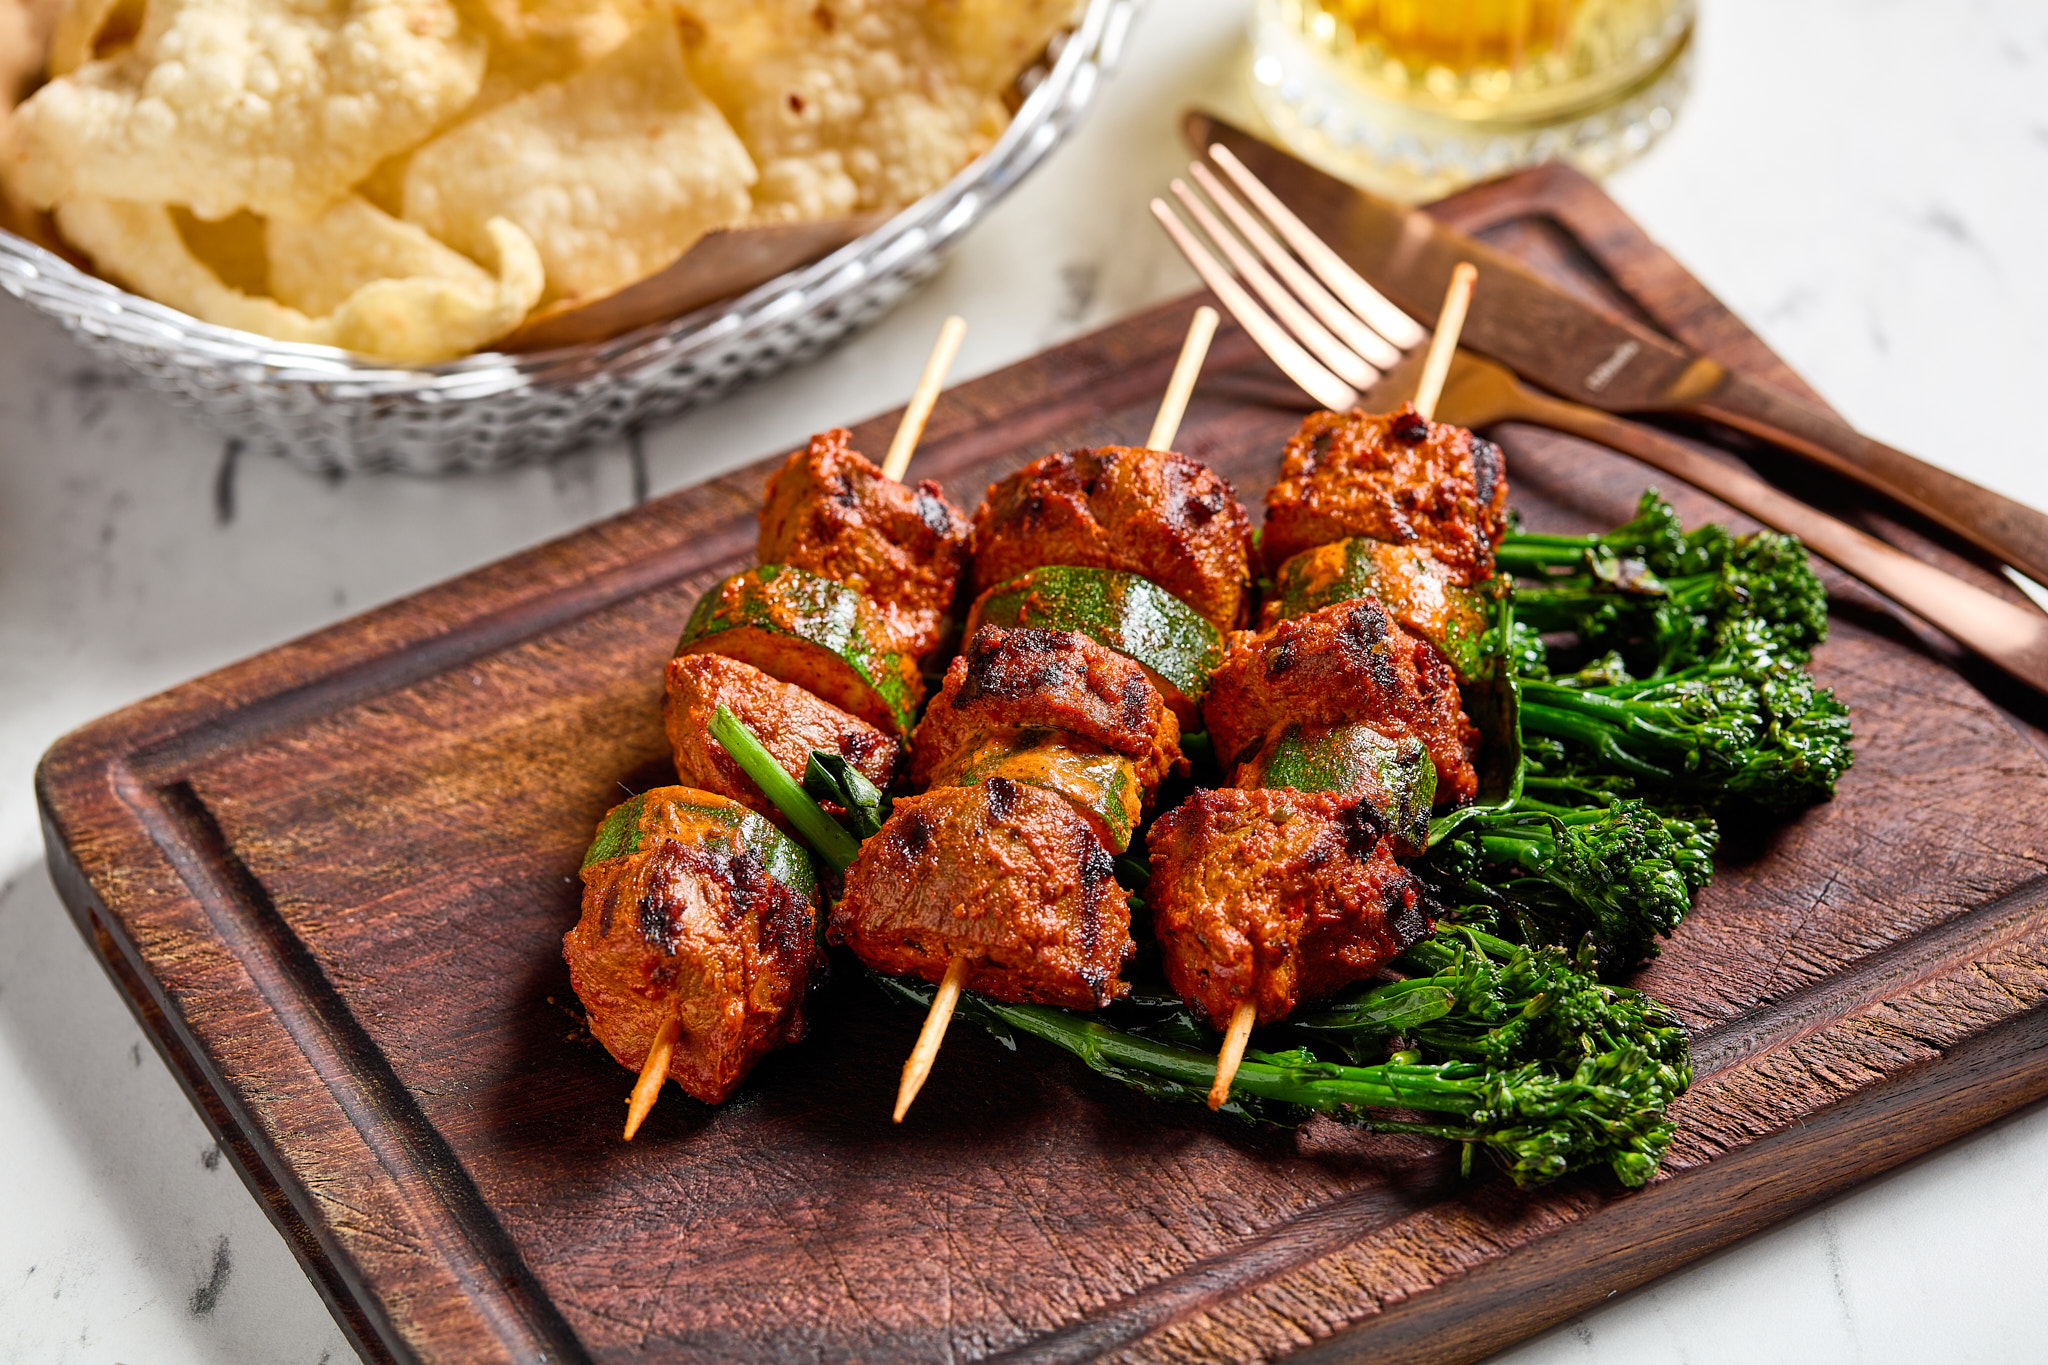 Spicy Chicken and Zucchini Skewers with Broccolini